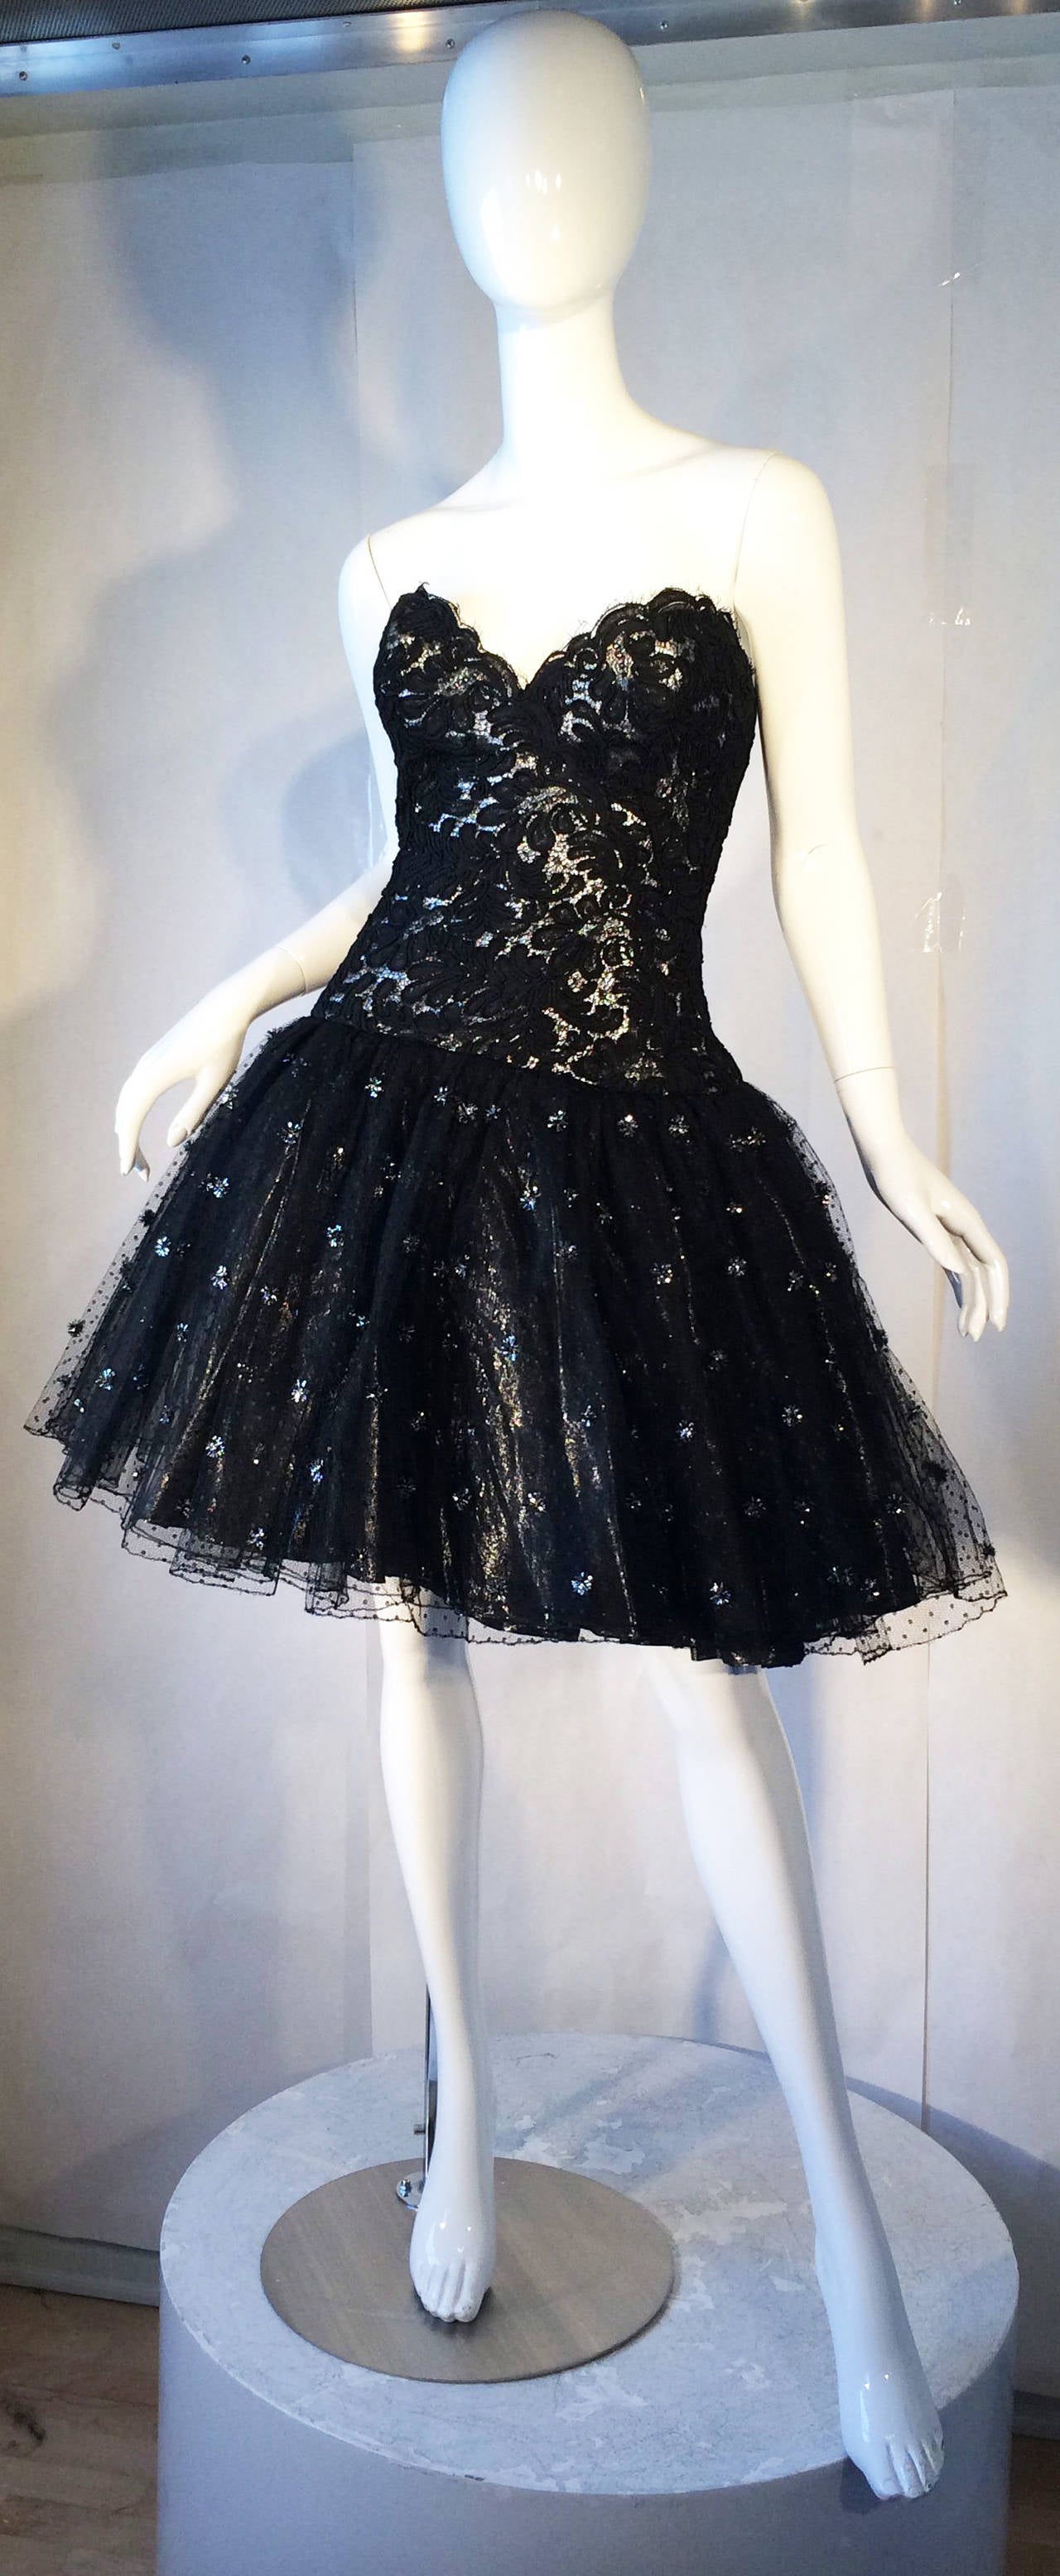 A fine and rare vintage Bob Mackie cocktail dress. Original custom order couture item features a fine black lace over a silver metallic bodice and multiple layers crinoline lace skirt with silver lurex details. Item fully silk lined with a boned